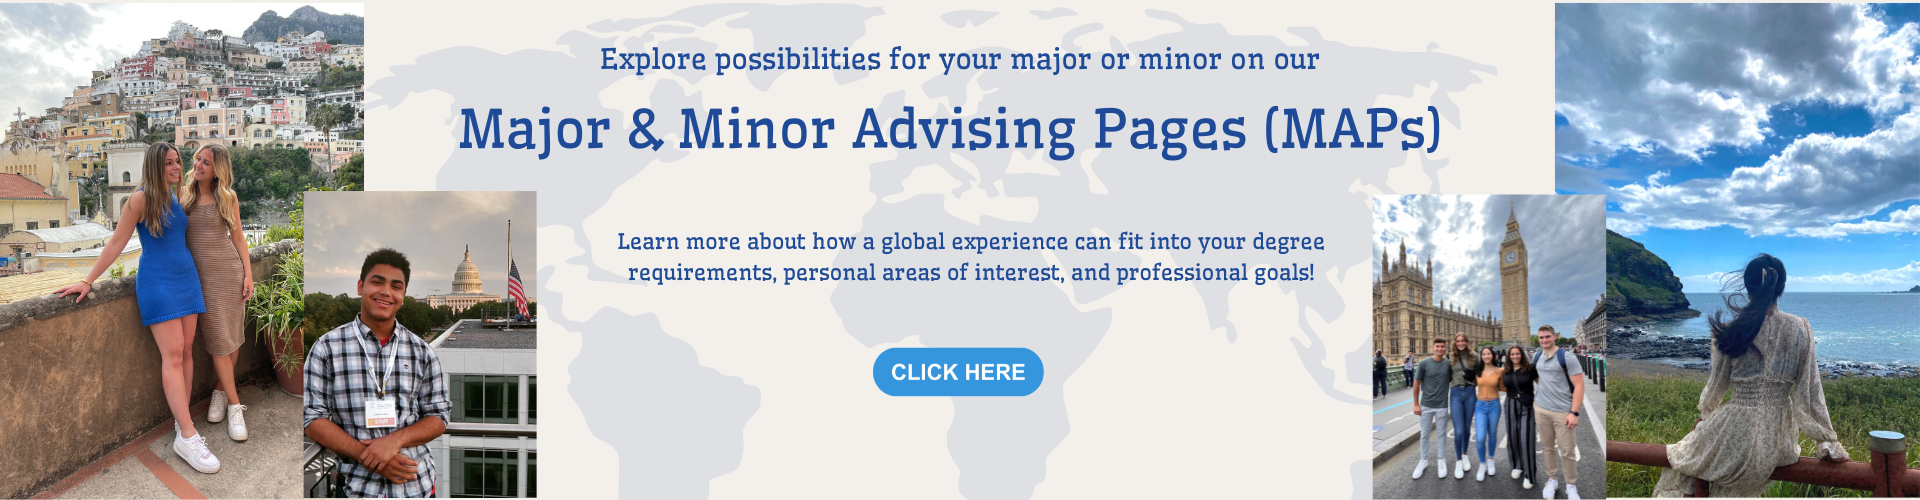 Major Minor Advising Pages Link